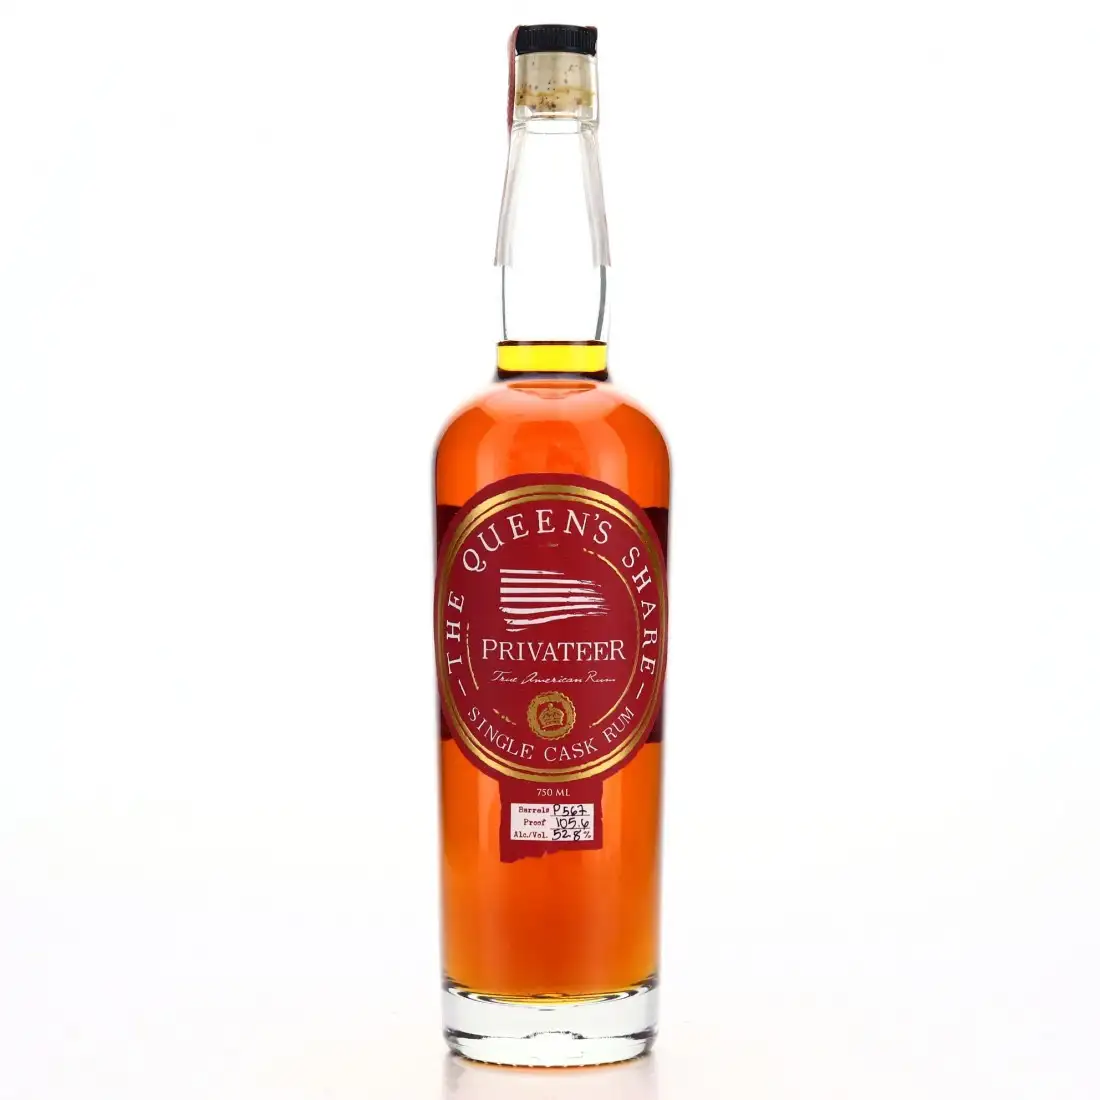 Image of the front of the bottle of the rum The Queen's Share Single Cask